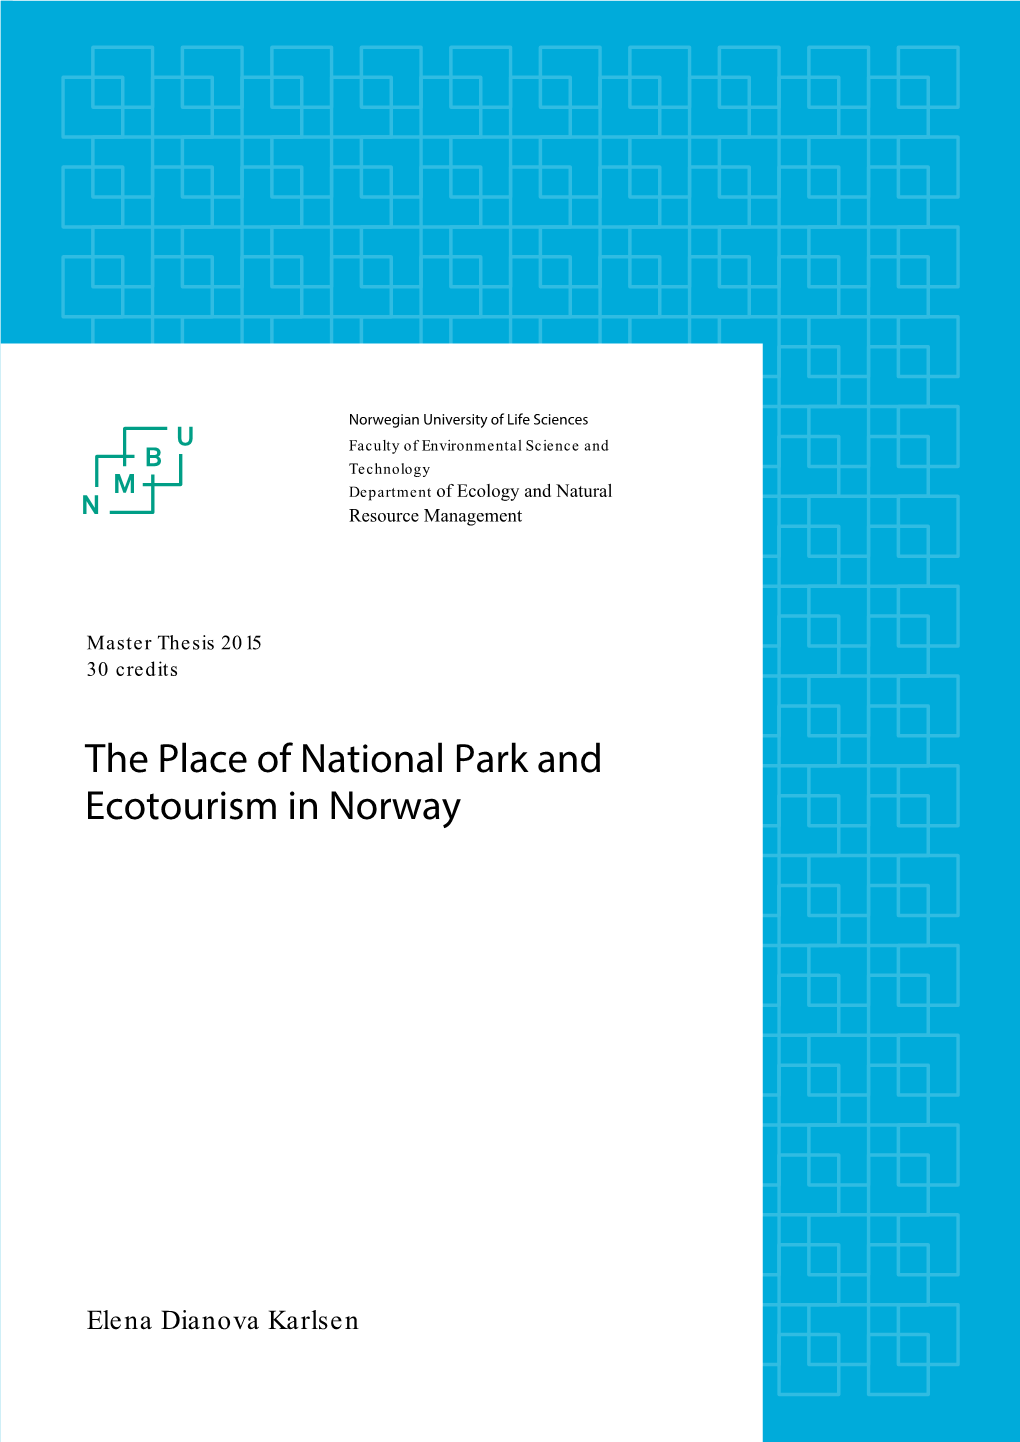 The Place of National Park and Ecotourism in Norway